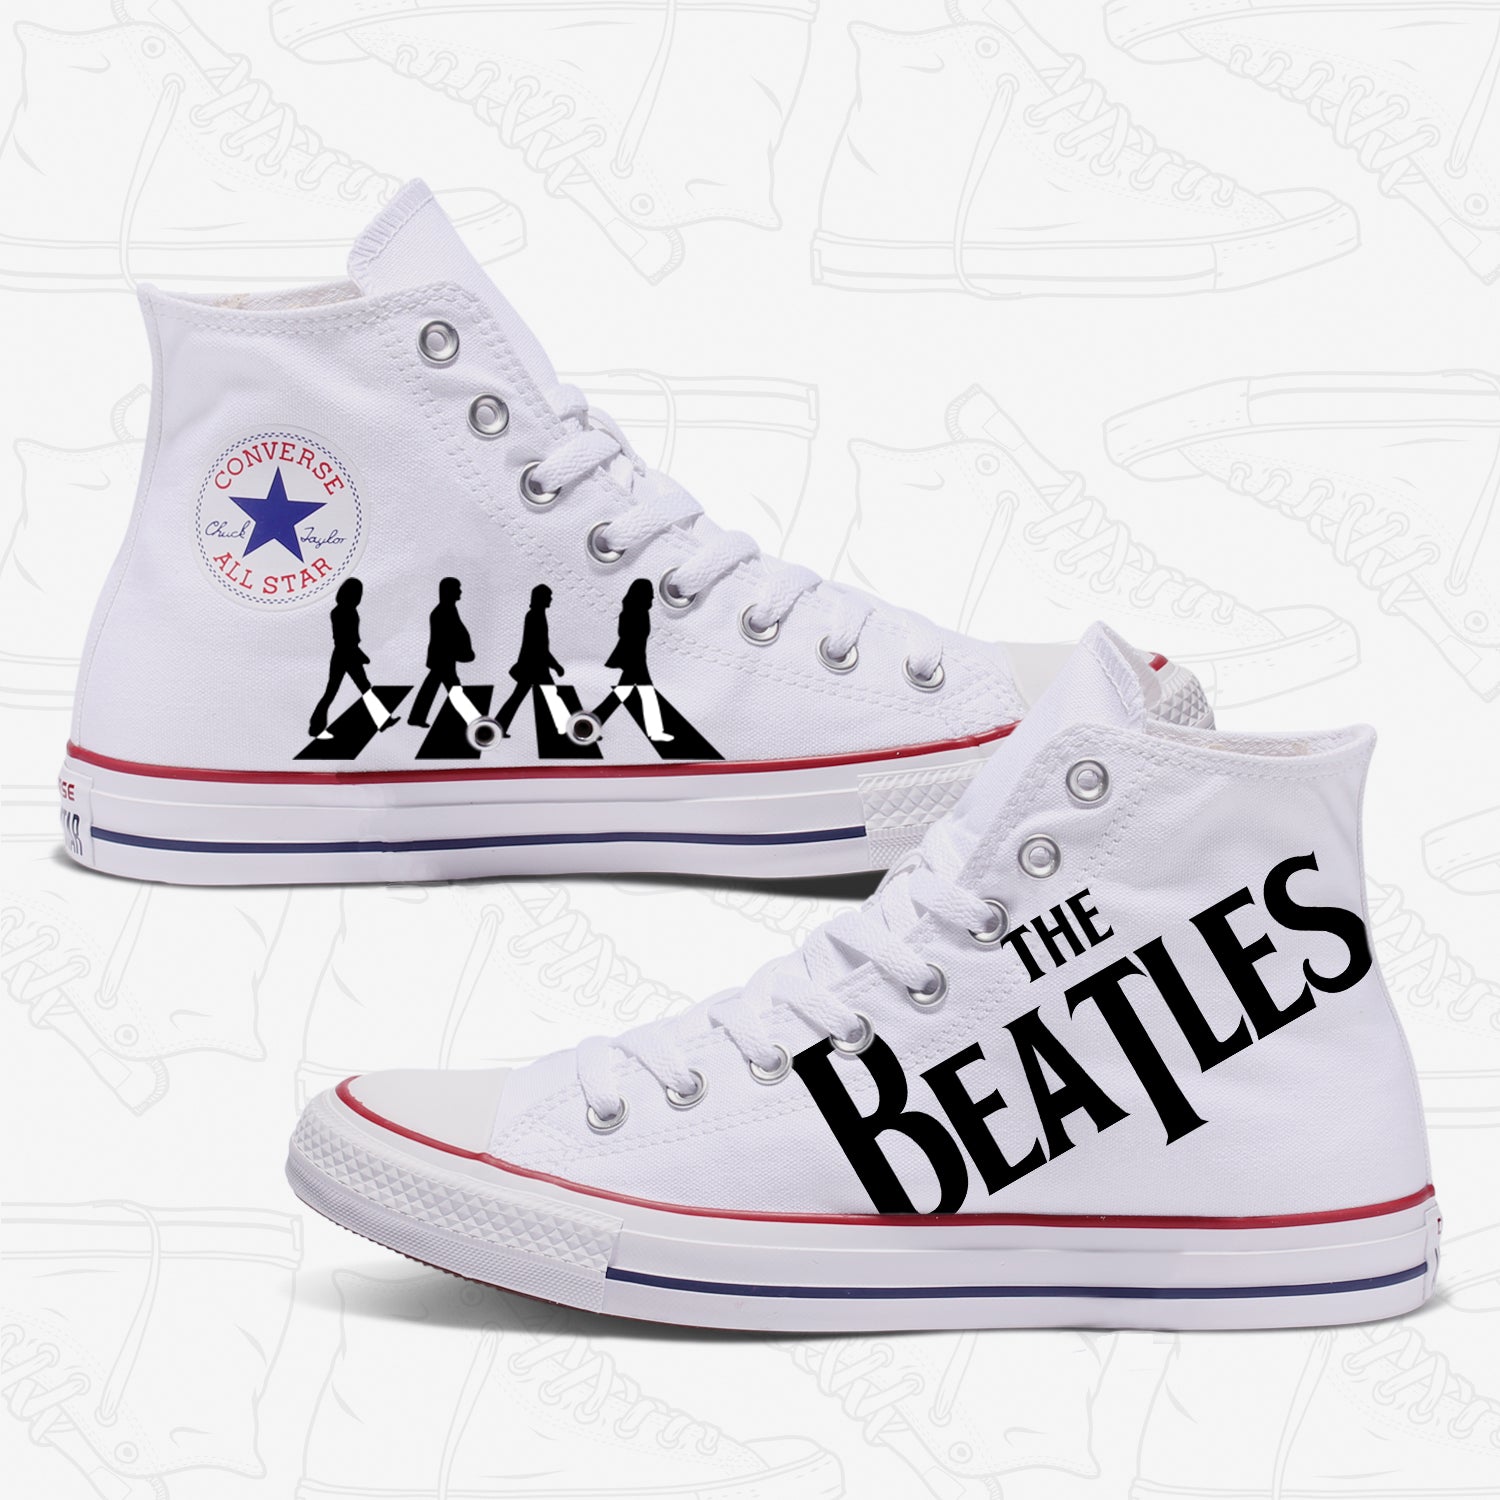 converse the rolling stones